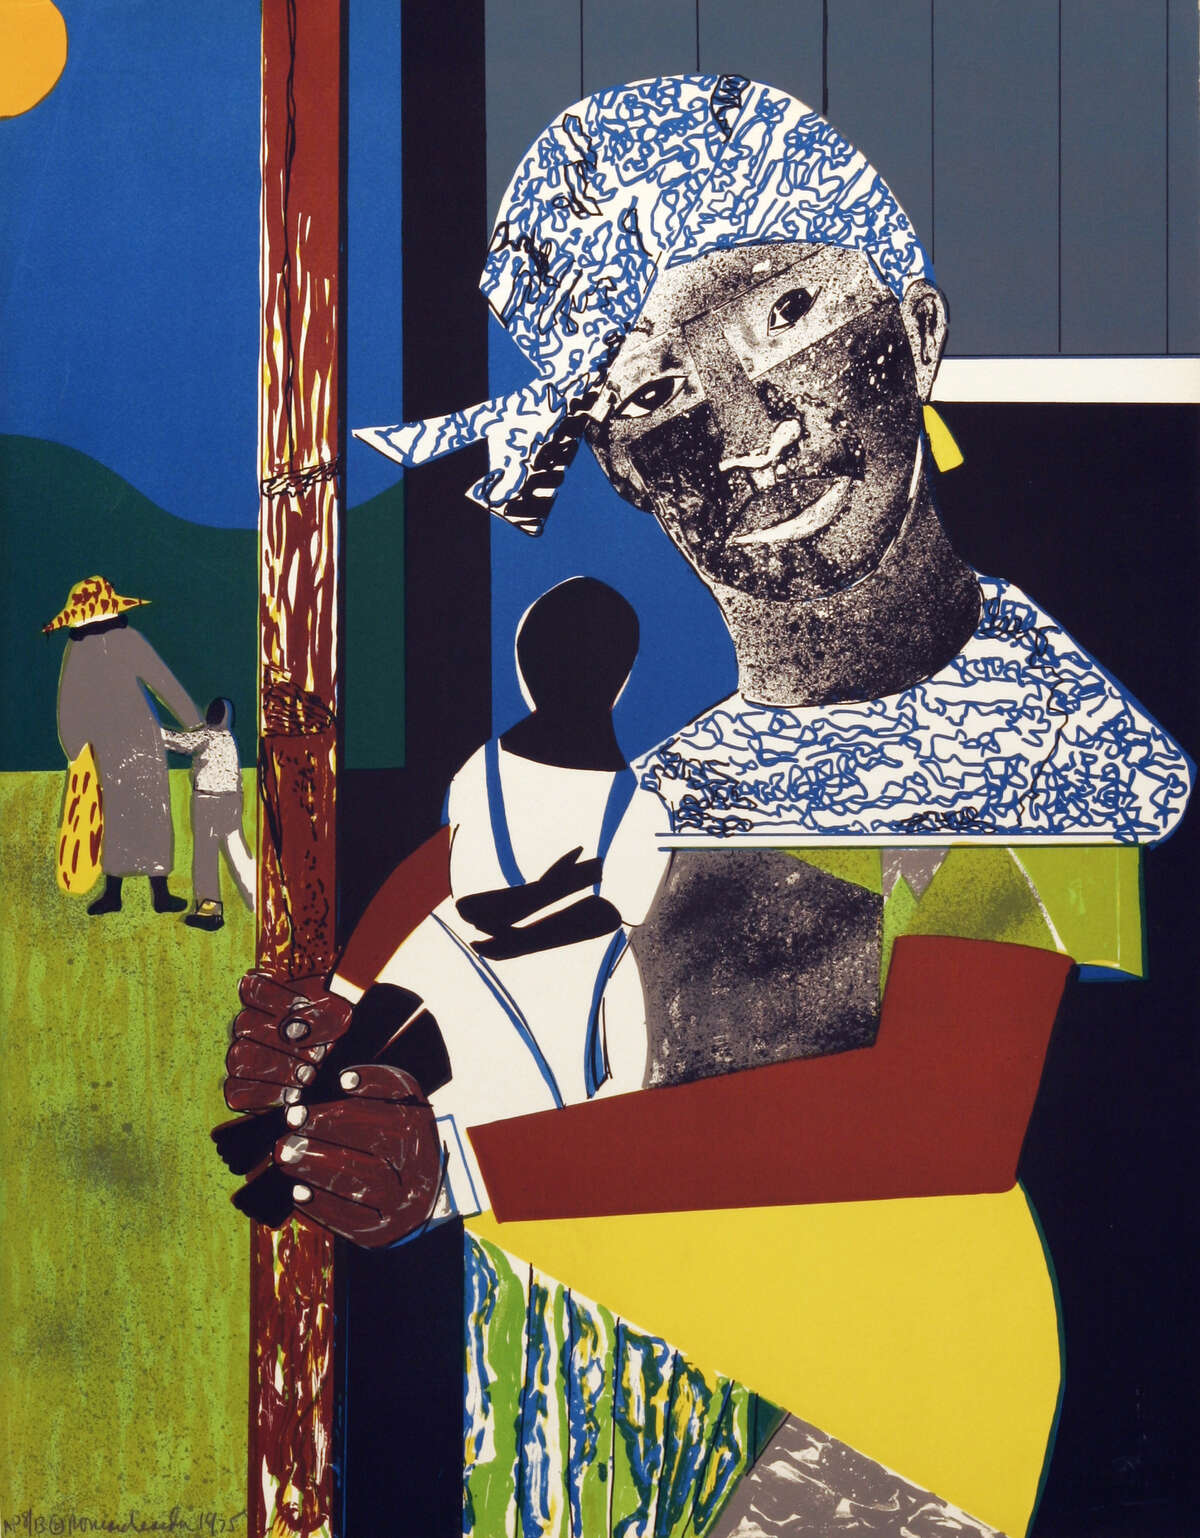 Exhibit of Romare Bearden's prints a mustsee show at The Hyde